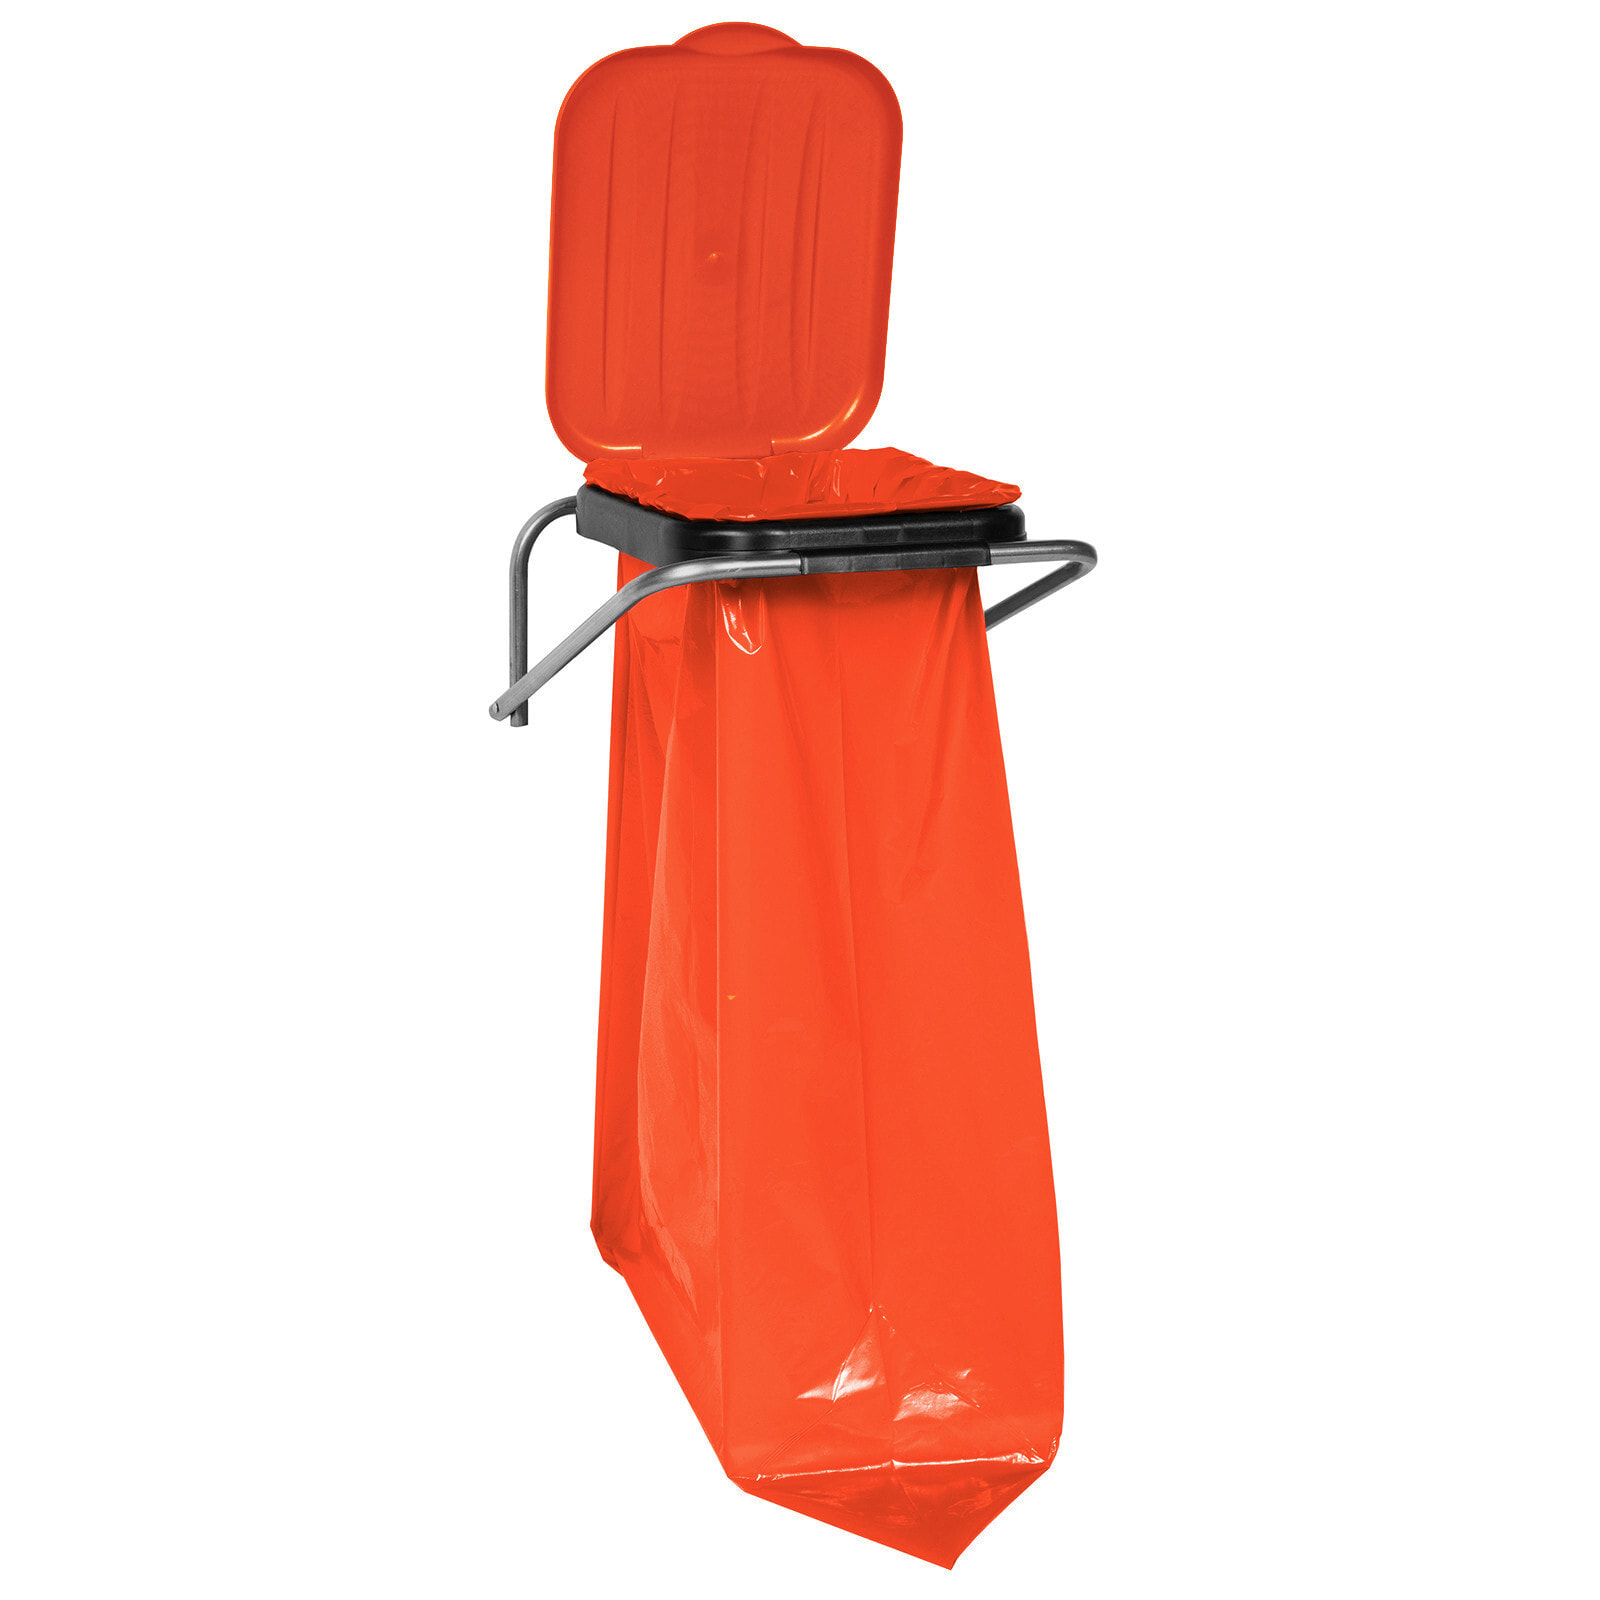 Wall mounted holder for waste segregation red - 120L bags